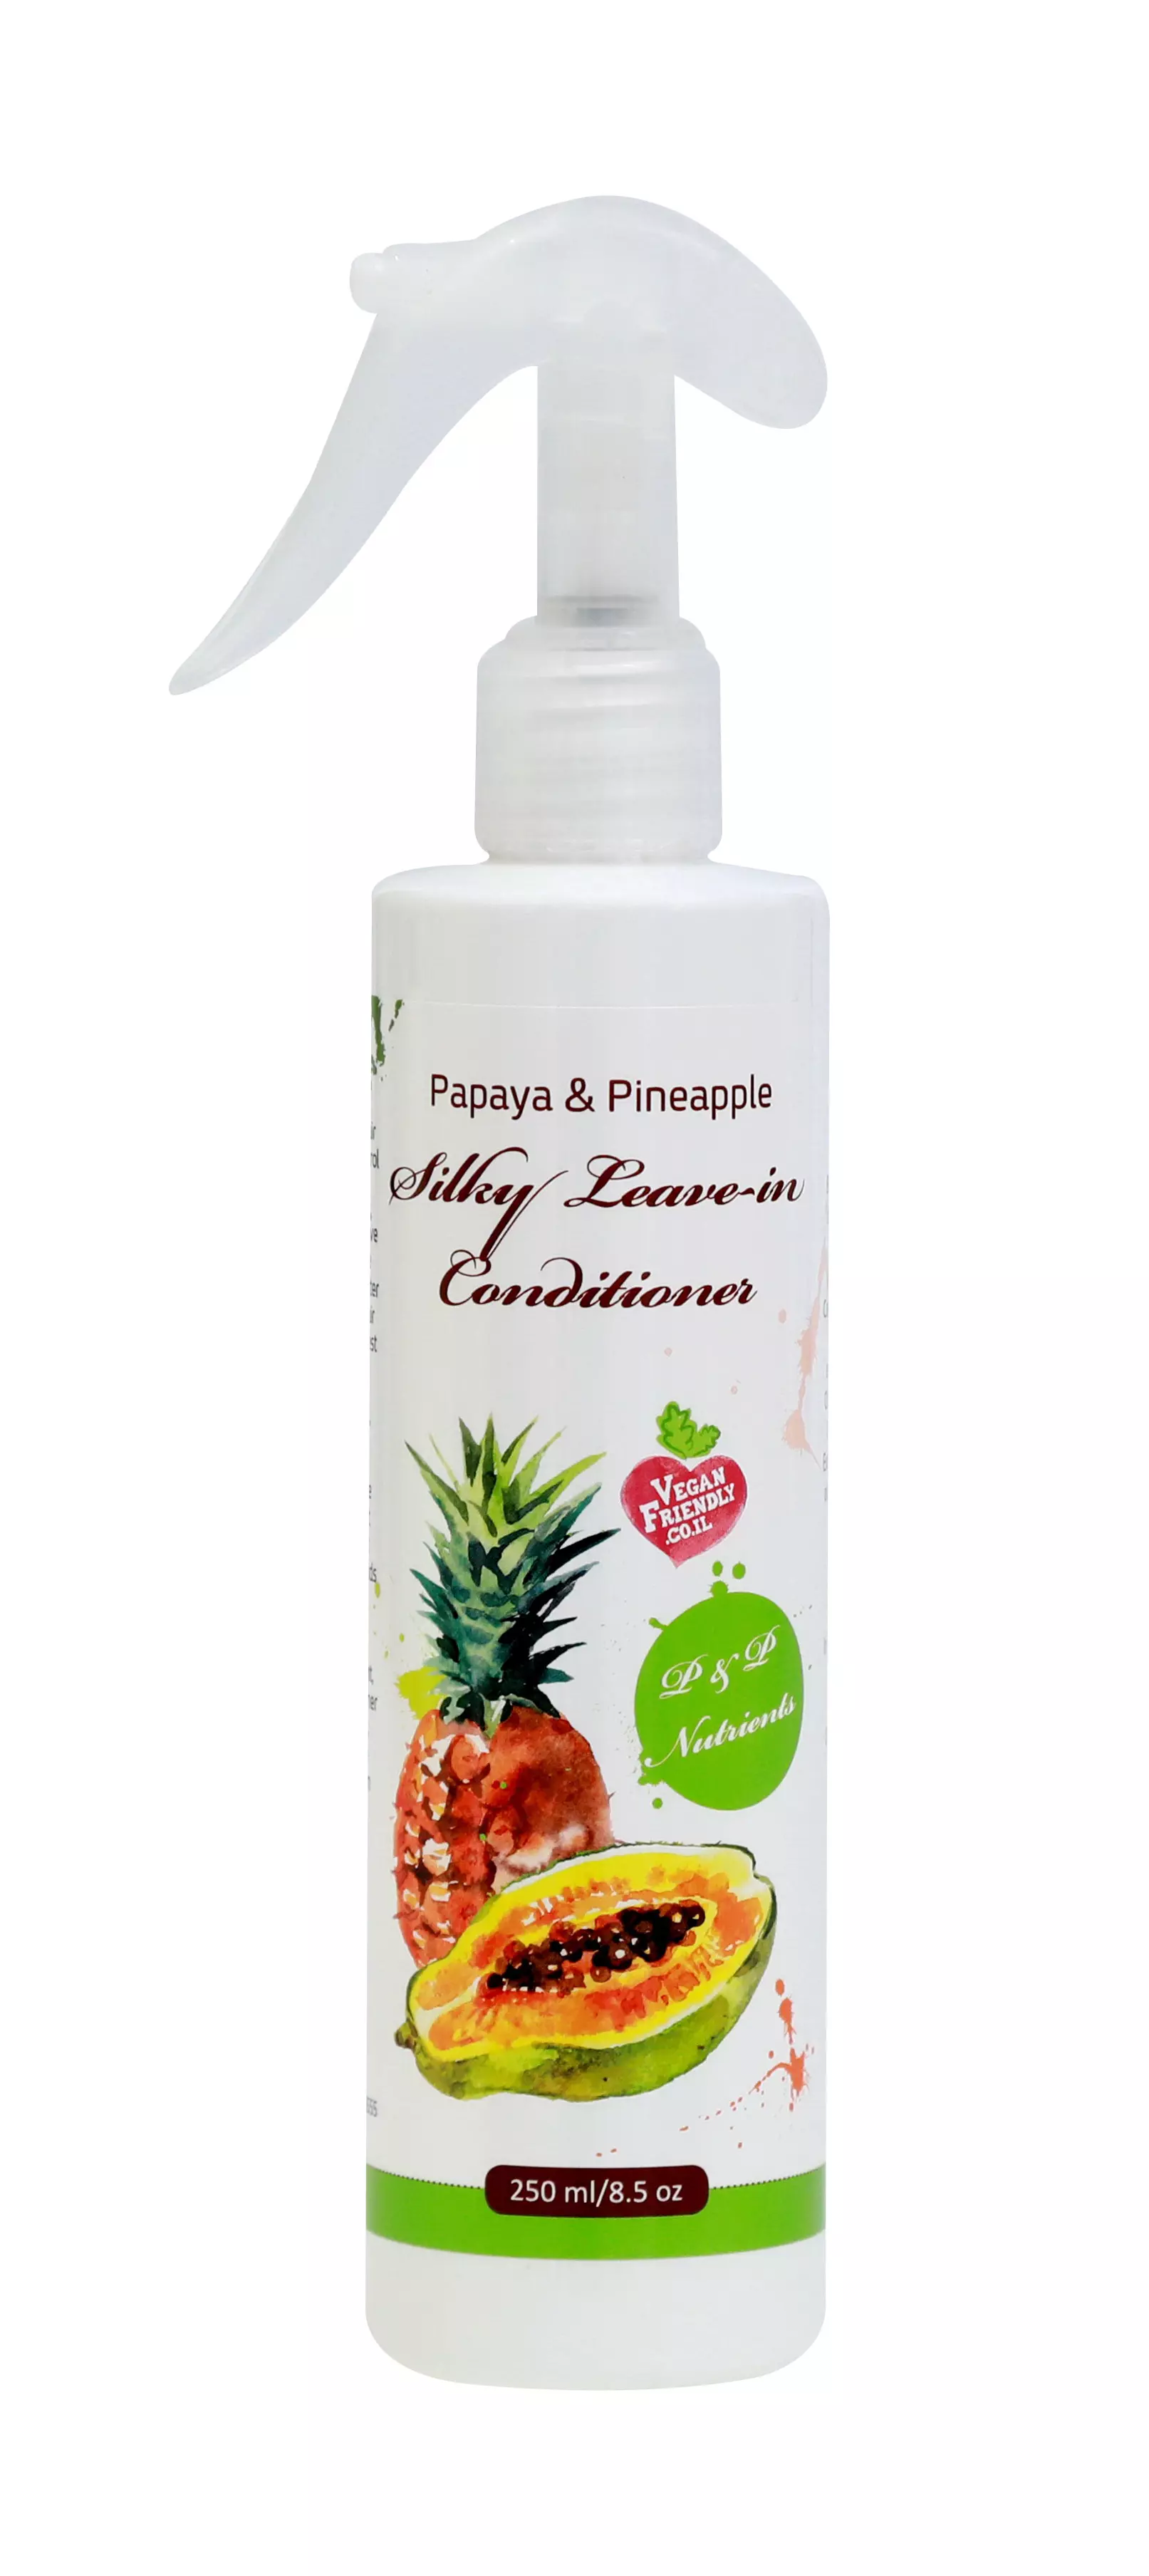 Papaya & Pineapple Silky Leave-In Conditioner